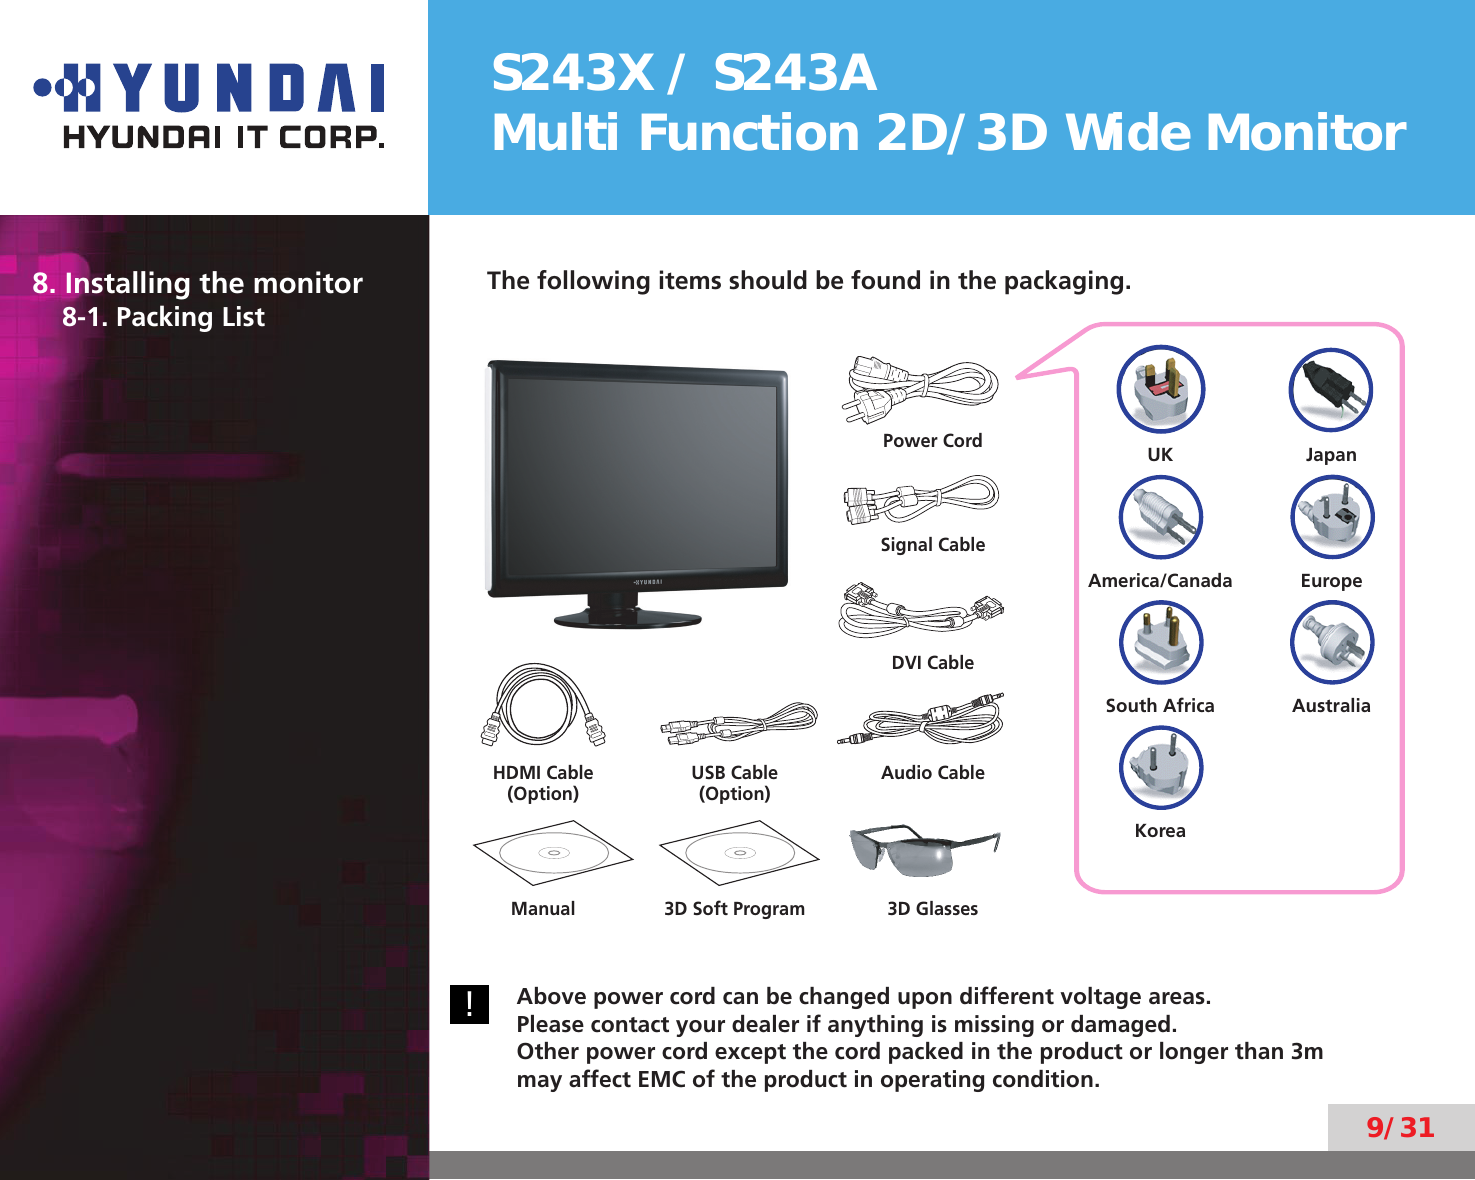 S243X / S243AMulti Function 2D/3D Wide Monitor9/318. Installing the monitor8-1. Packing ListThe following items should be found in the packaging.UK JapanAmerica/Canada EuropeSouth Africa AustraliaKorea!Above power cord can be changed upon different voltage areas.  Please contact your dealer if anything is missing or damaged.  Other power cord except the cord packed in the product or longer than 3m  may affect EMC of the product in operating condition.Power CordSignal CableManual USB Cable(Option)HDMI Cable(Option)DVI Cable Audio Cable 3D Glasses3D Soft Program